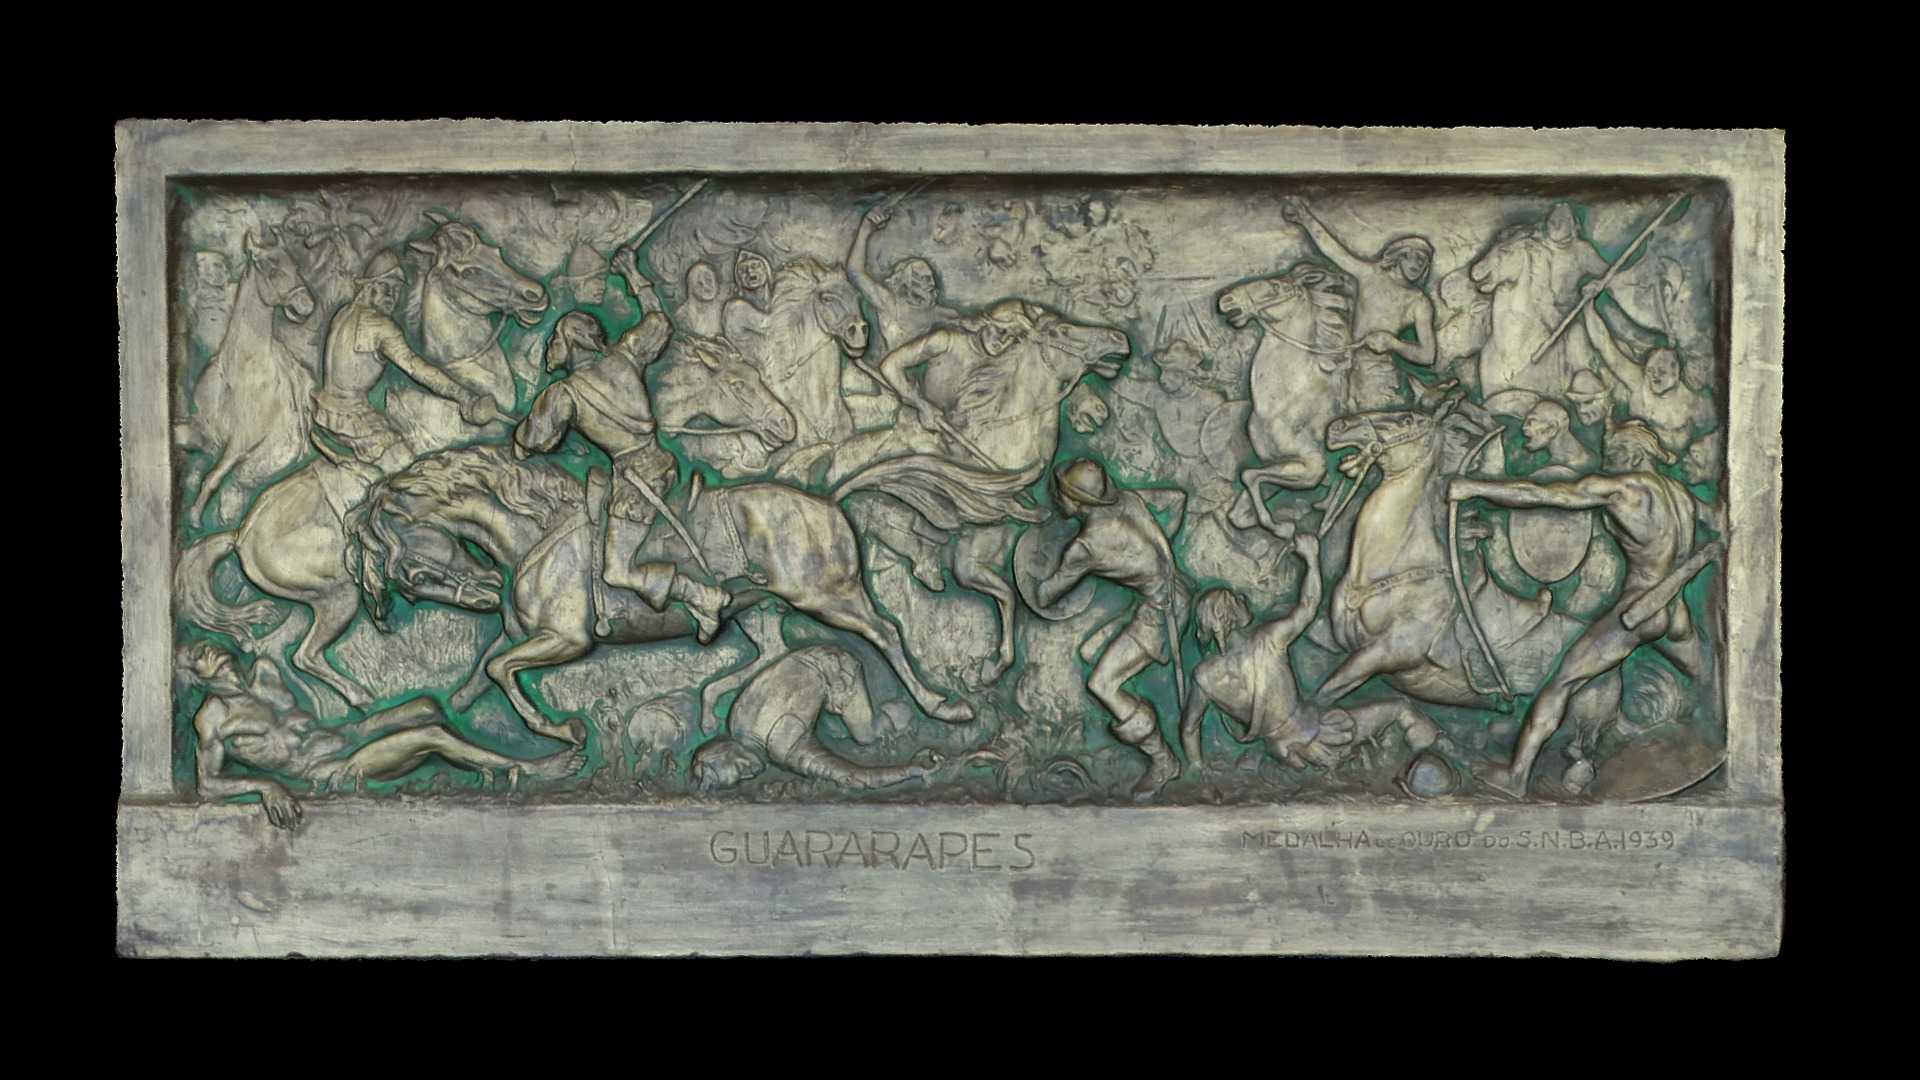 3D model Guararapes - This is a 3D model of the Guararapes. The 3D model is about a stone plaque with a group of people riding horses.